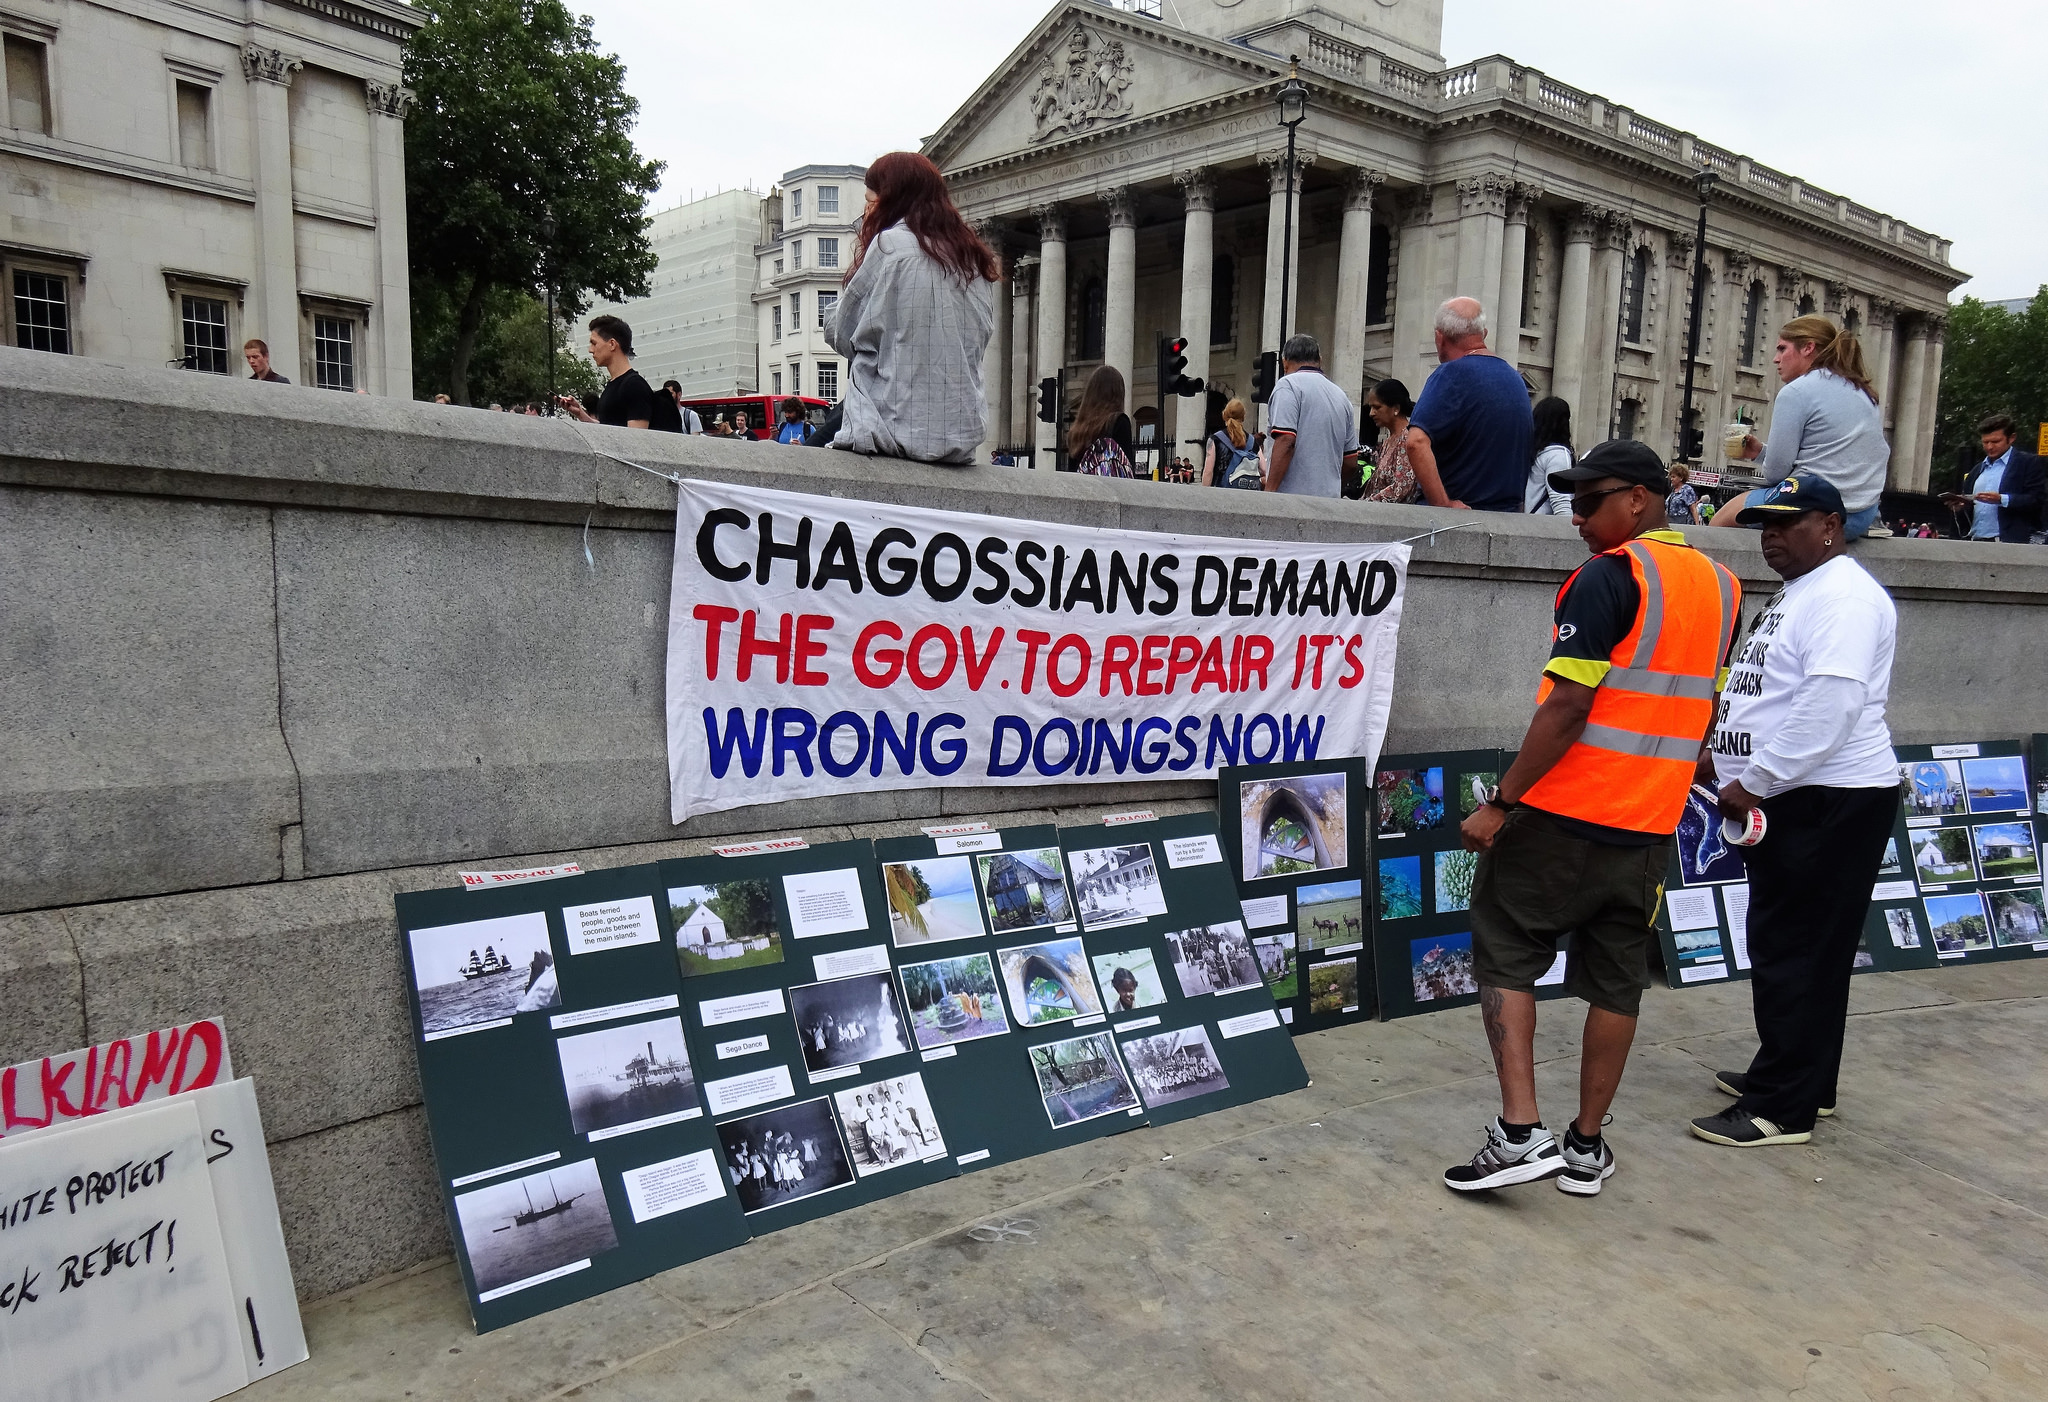 Protests against British occupation of the Chagos Islands